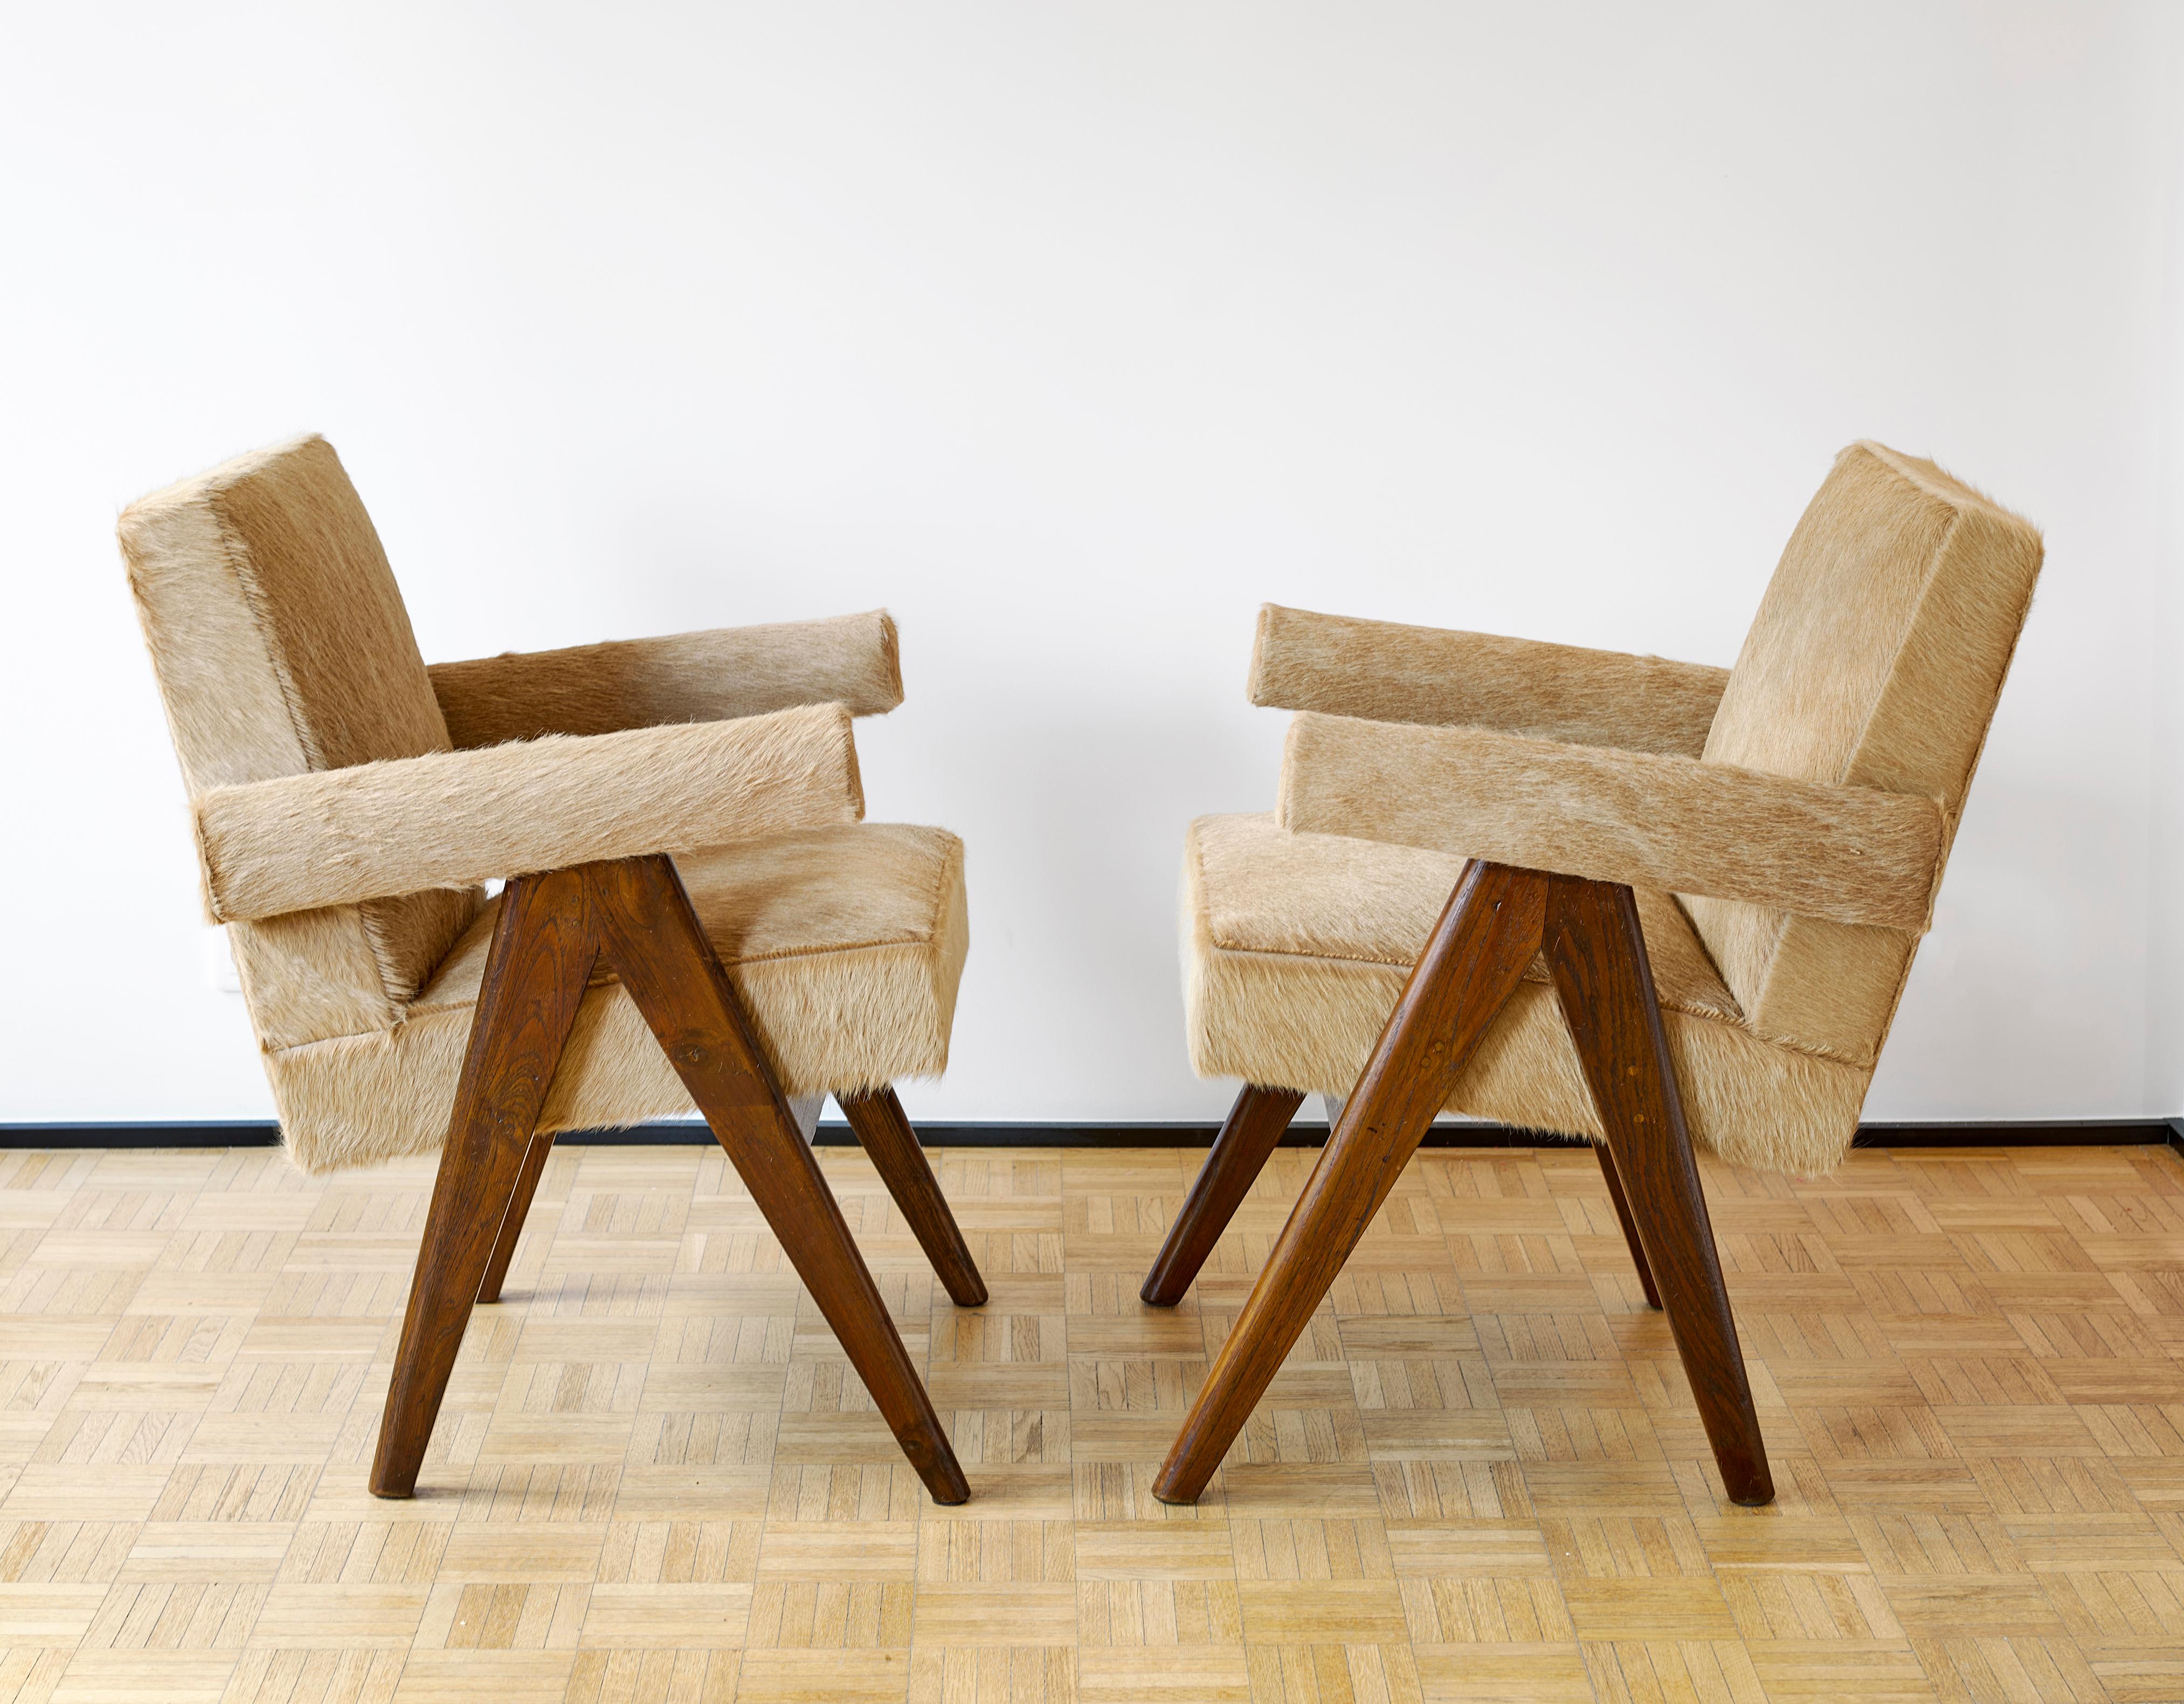 Indian Pierre Jeanneret, PJ-SI-30-D, Committee Armchairs, A Pair, Chandigarh, C. 1955